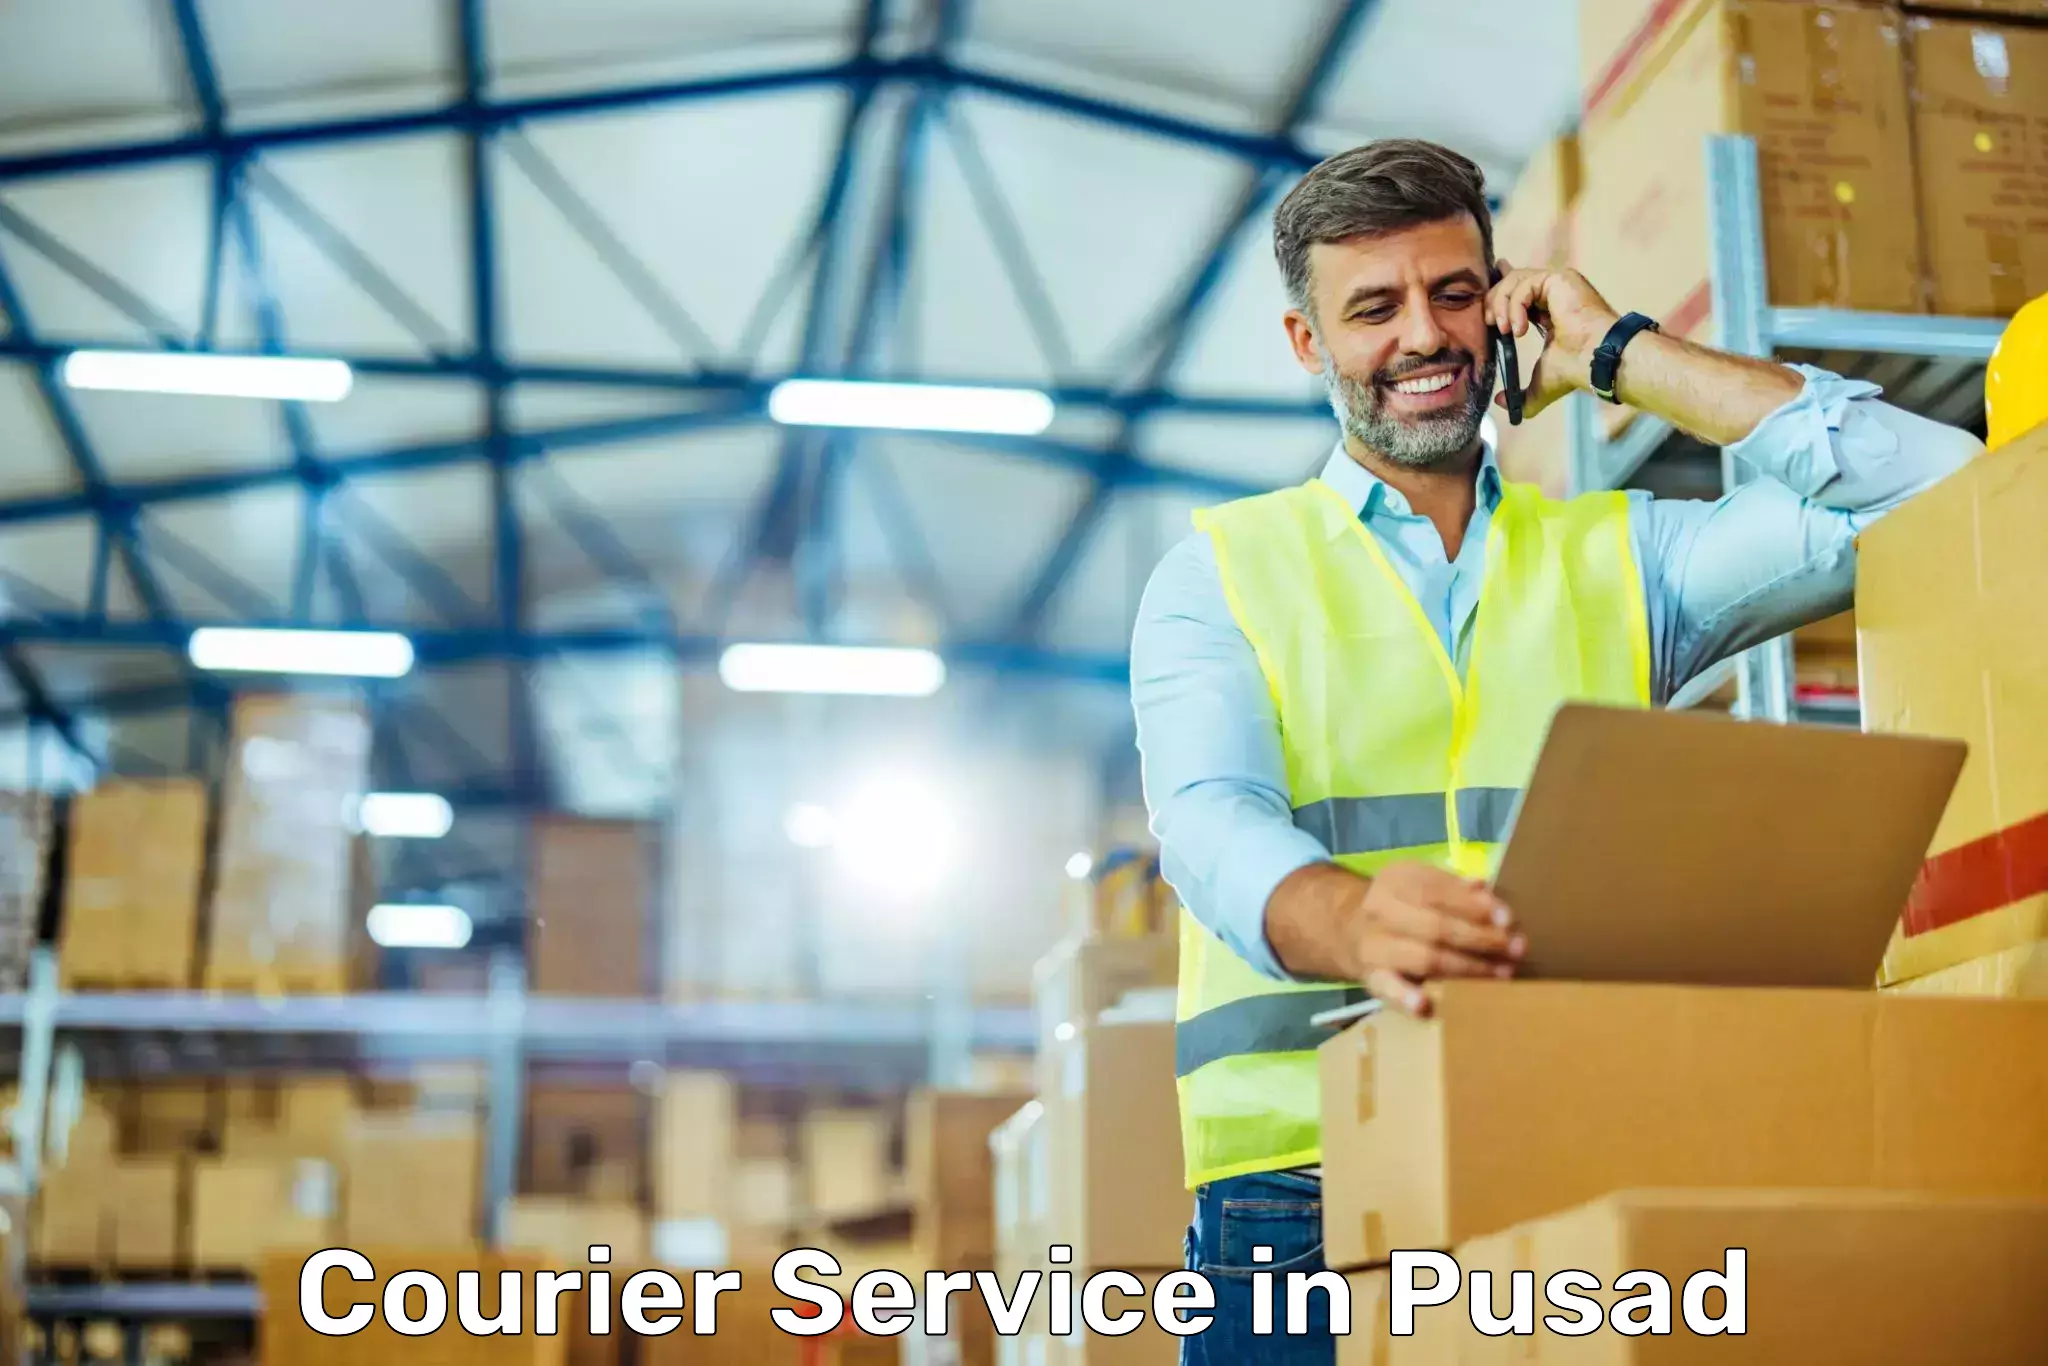 Seamless shipping experience in Pusad